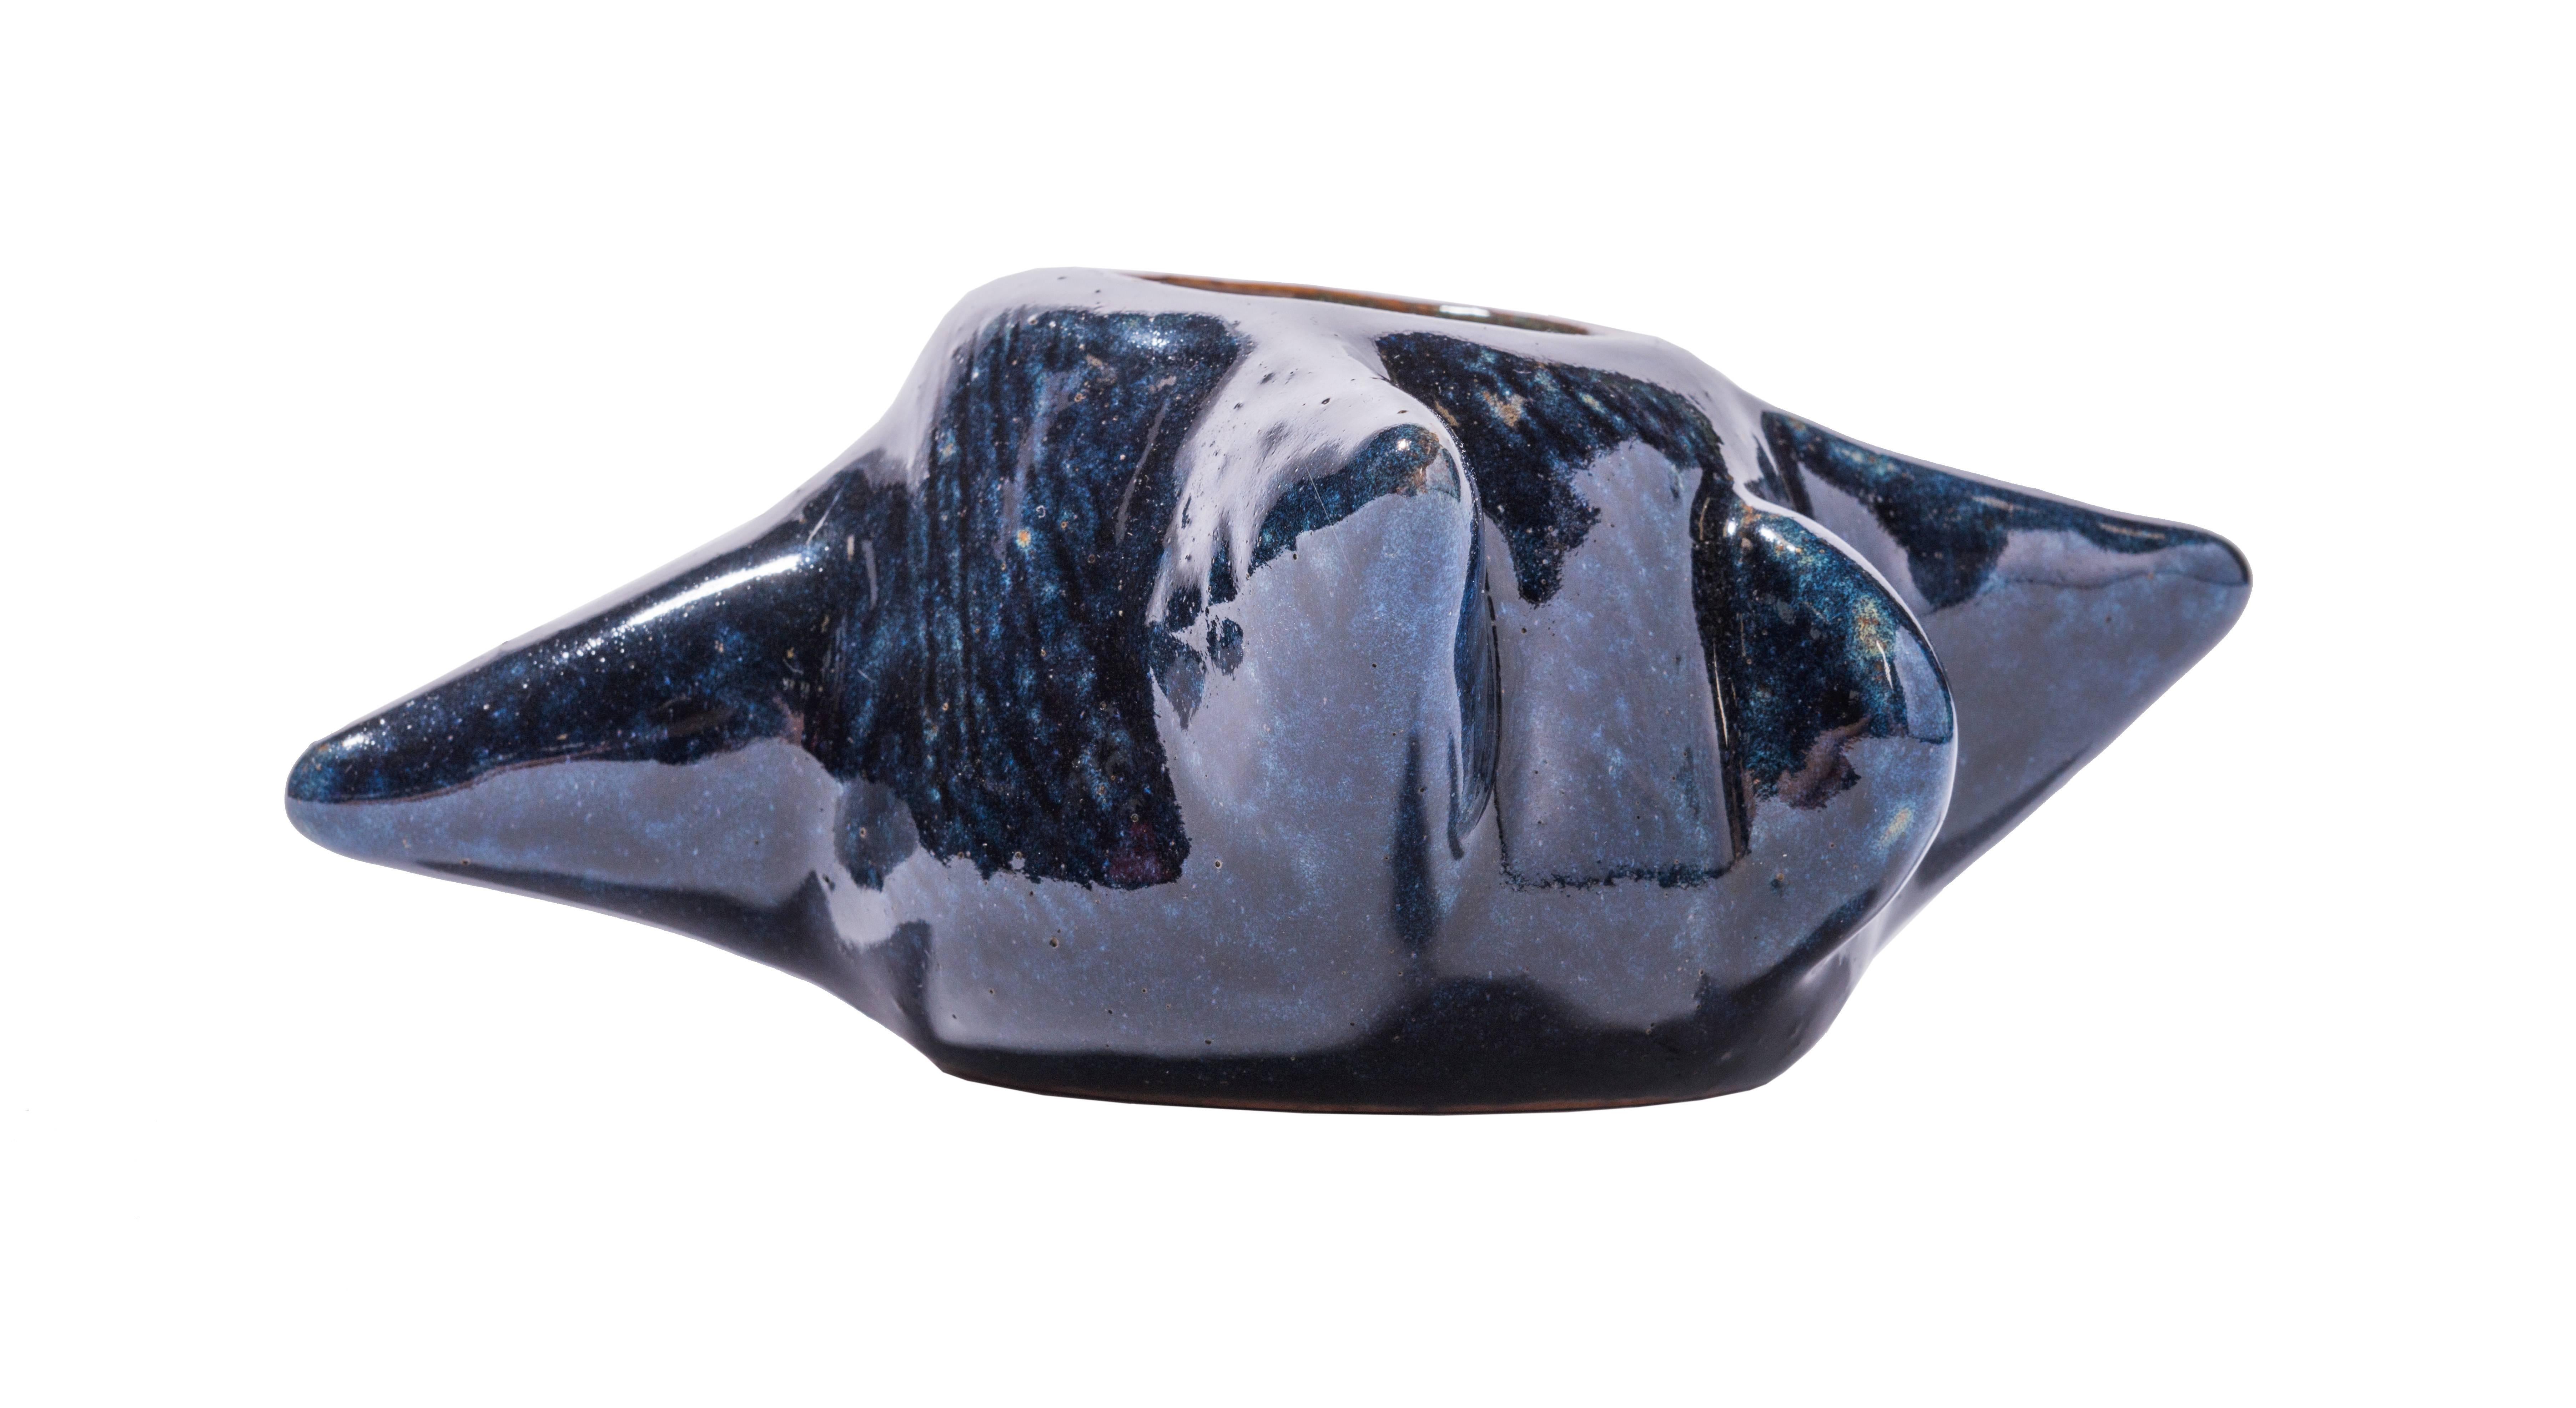 Small but dramatic Salto vase with wide large protrusions in a blue high-gloss glaze. Signed and in excellent condition.